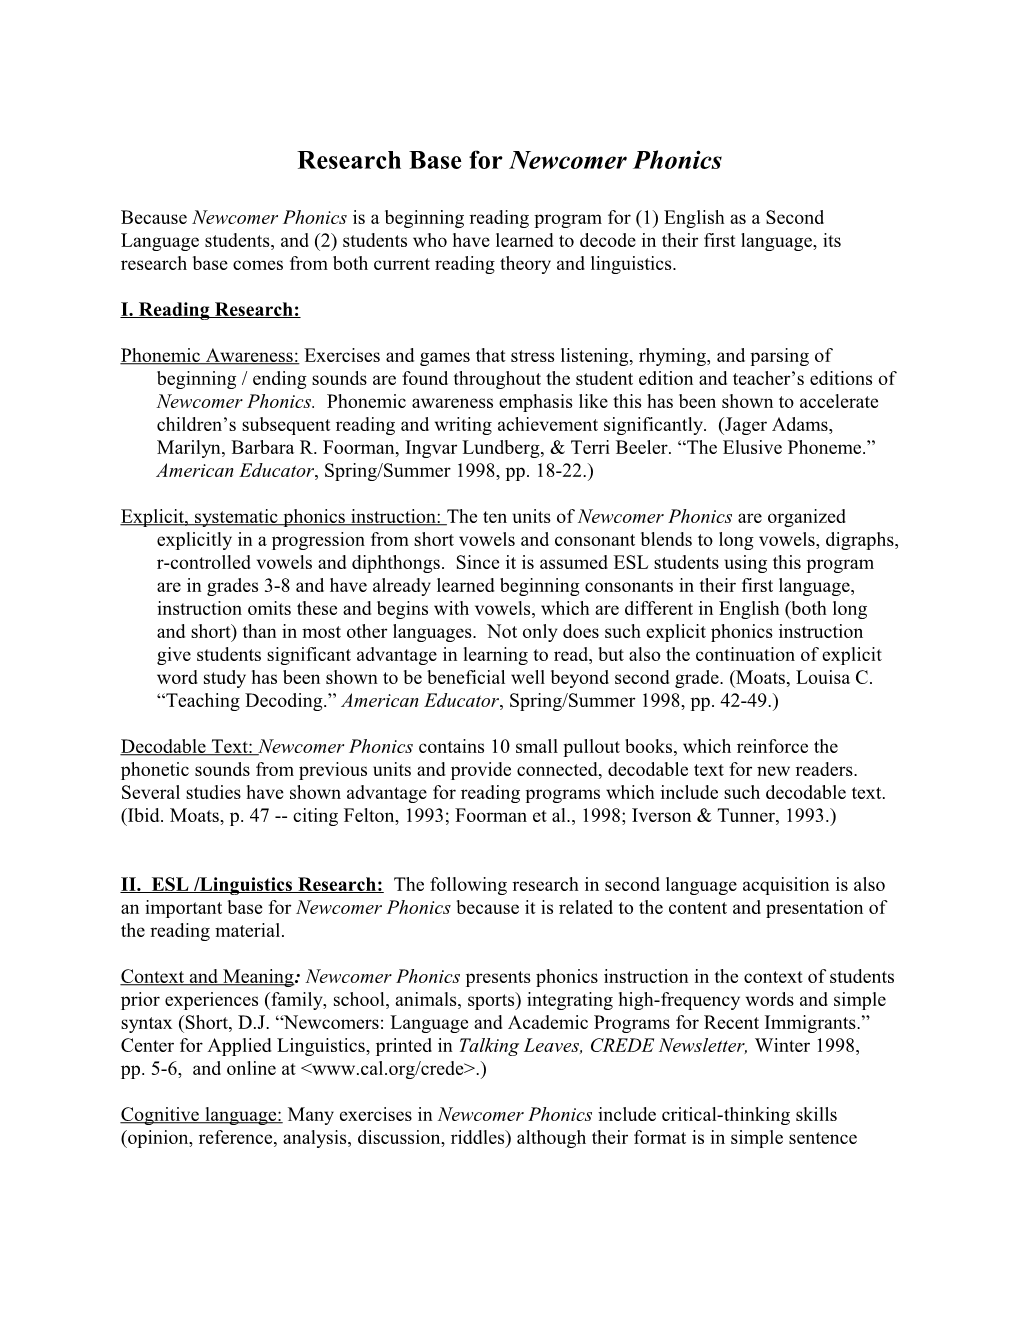 Research Base and Replicated Practices for Newcomer Phonics